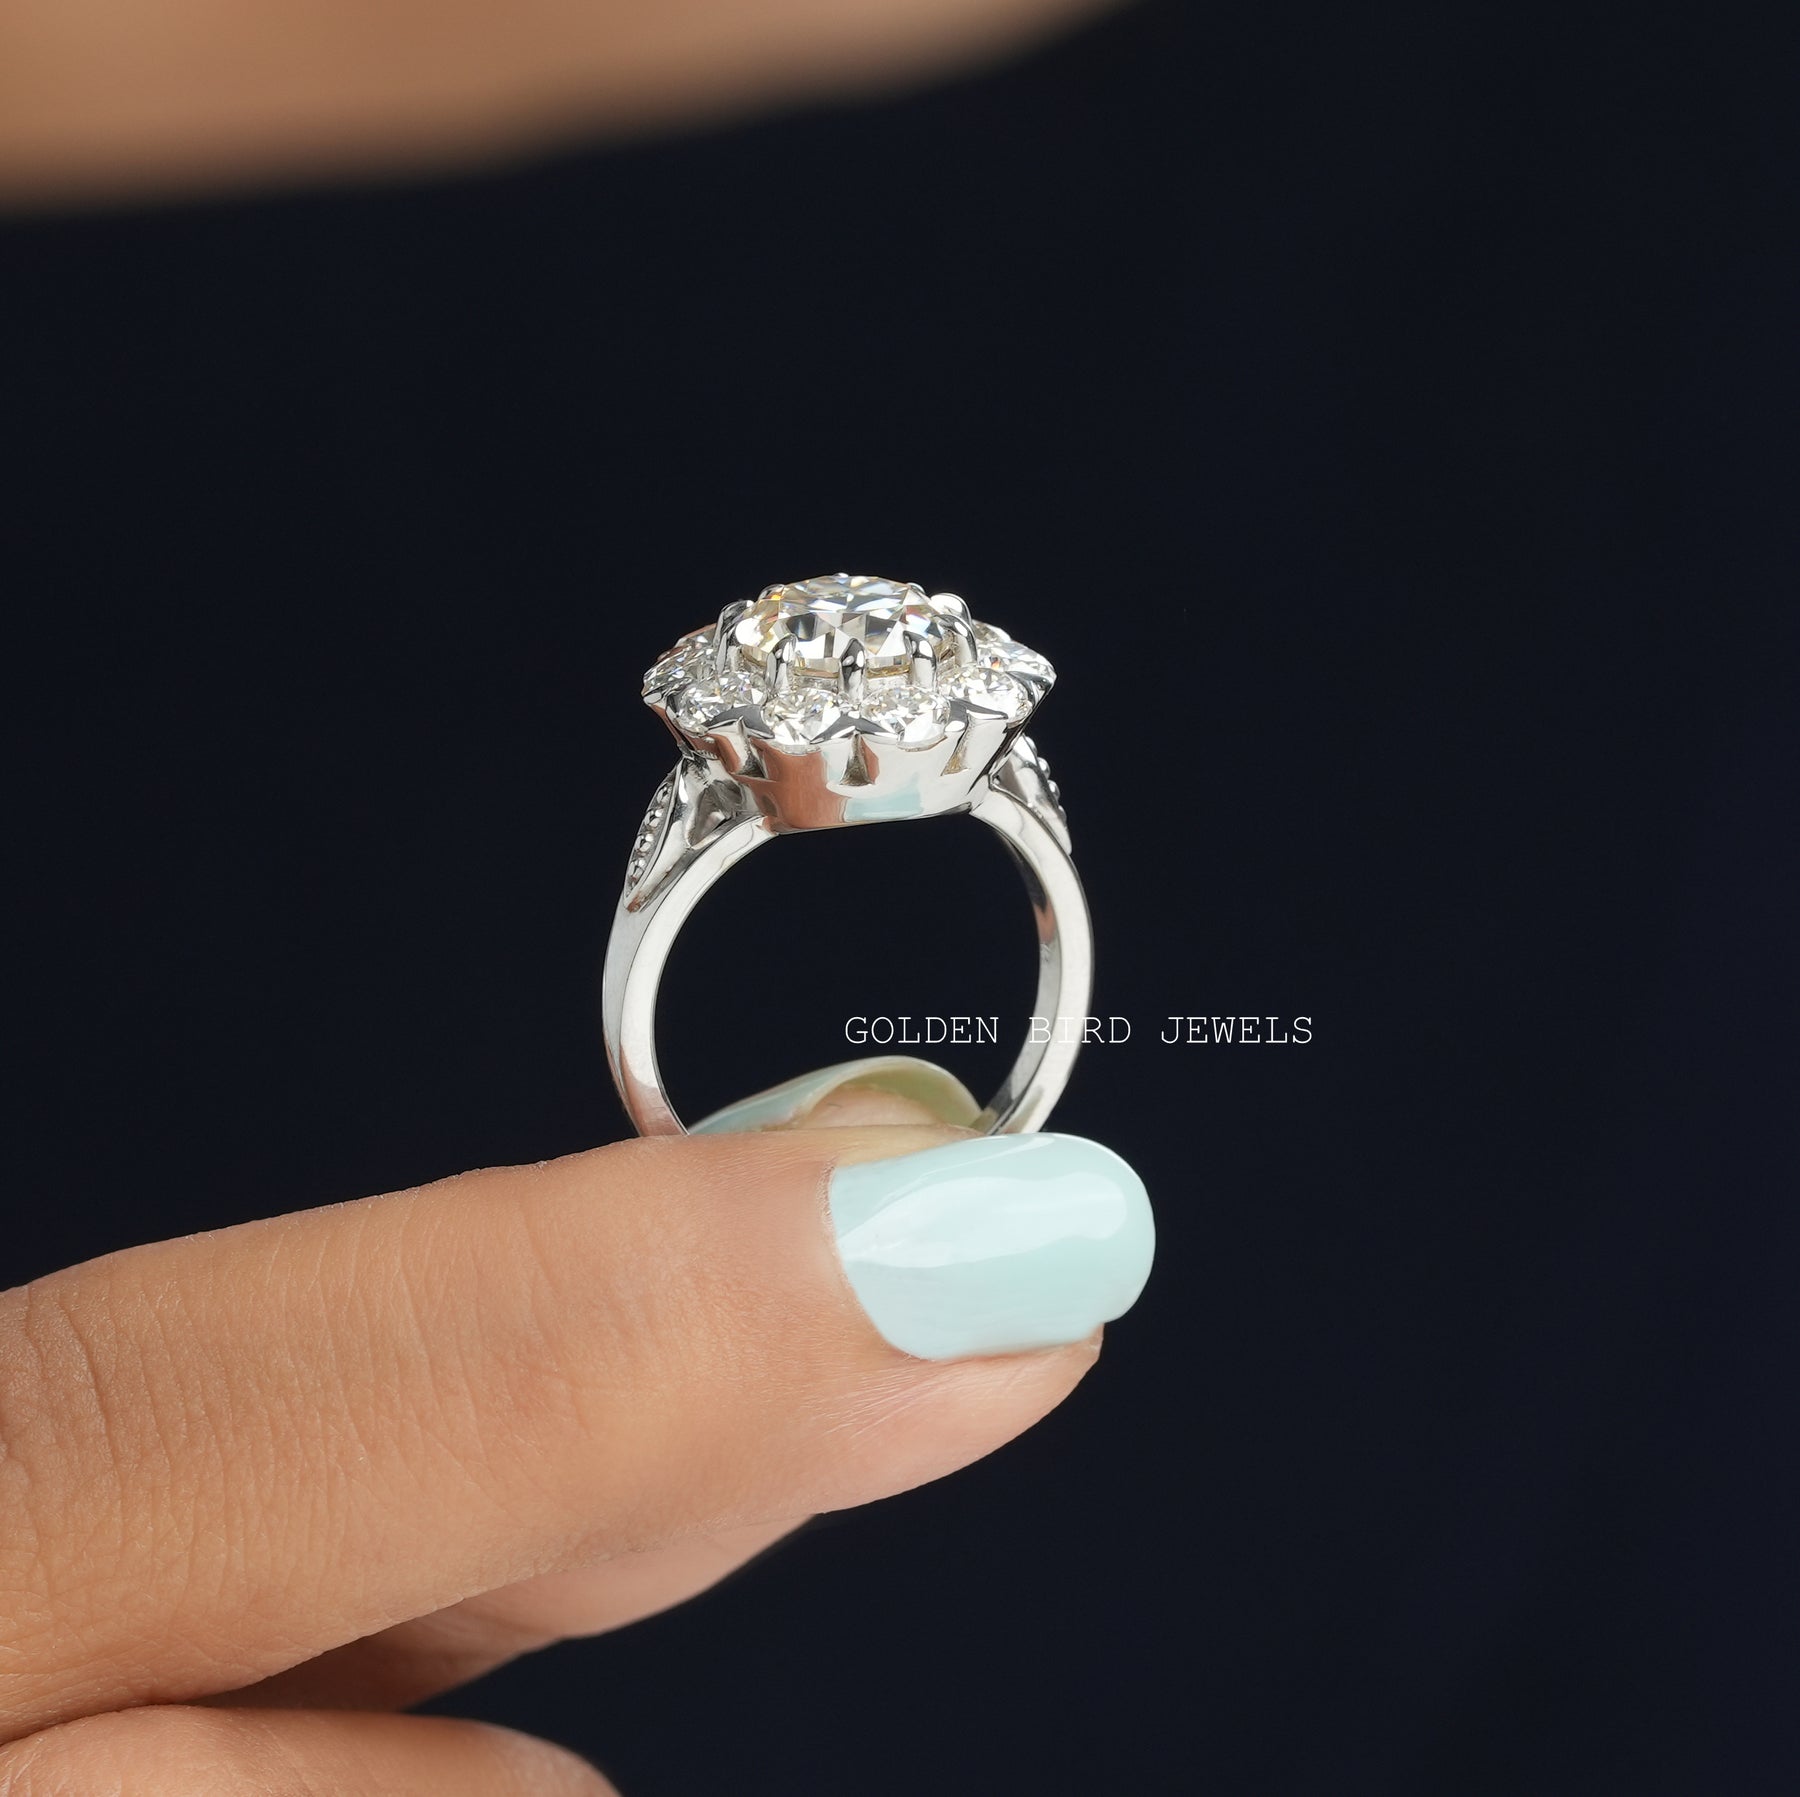 [This halo moissanite round cut ring made of 18k white gold]-[Golden Bird Jewels]